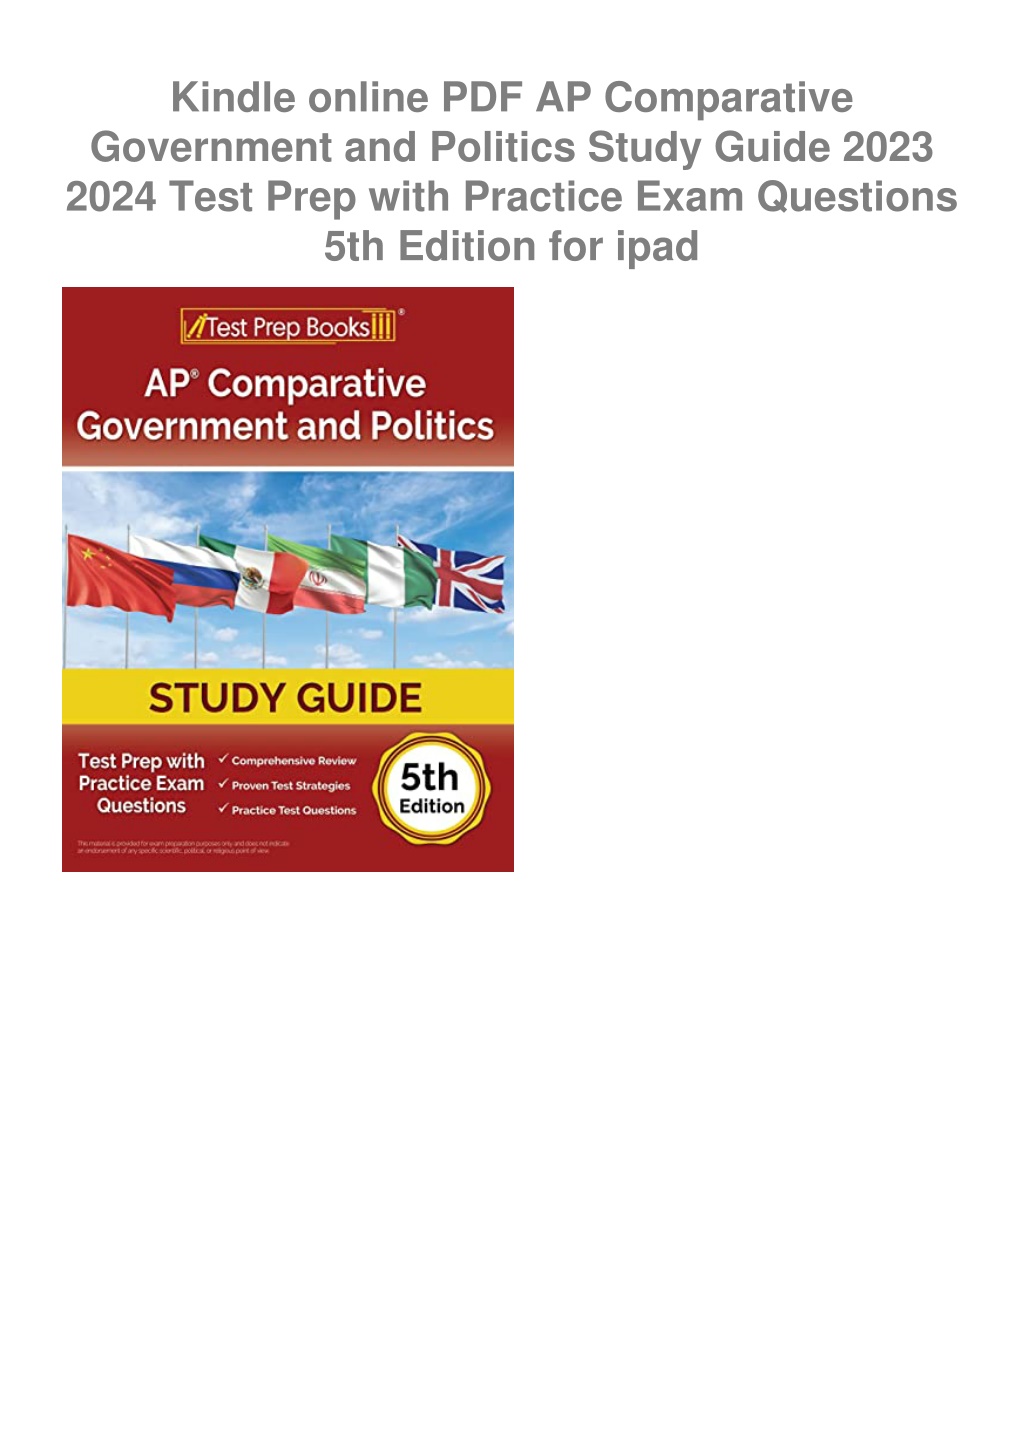 PPT Kindle online PDF AP Comparative Government and Politics Study